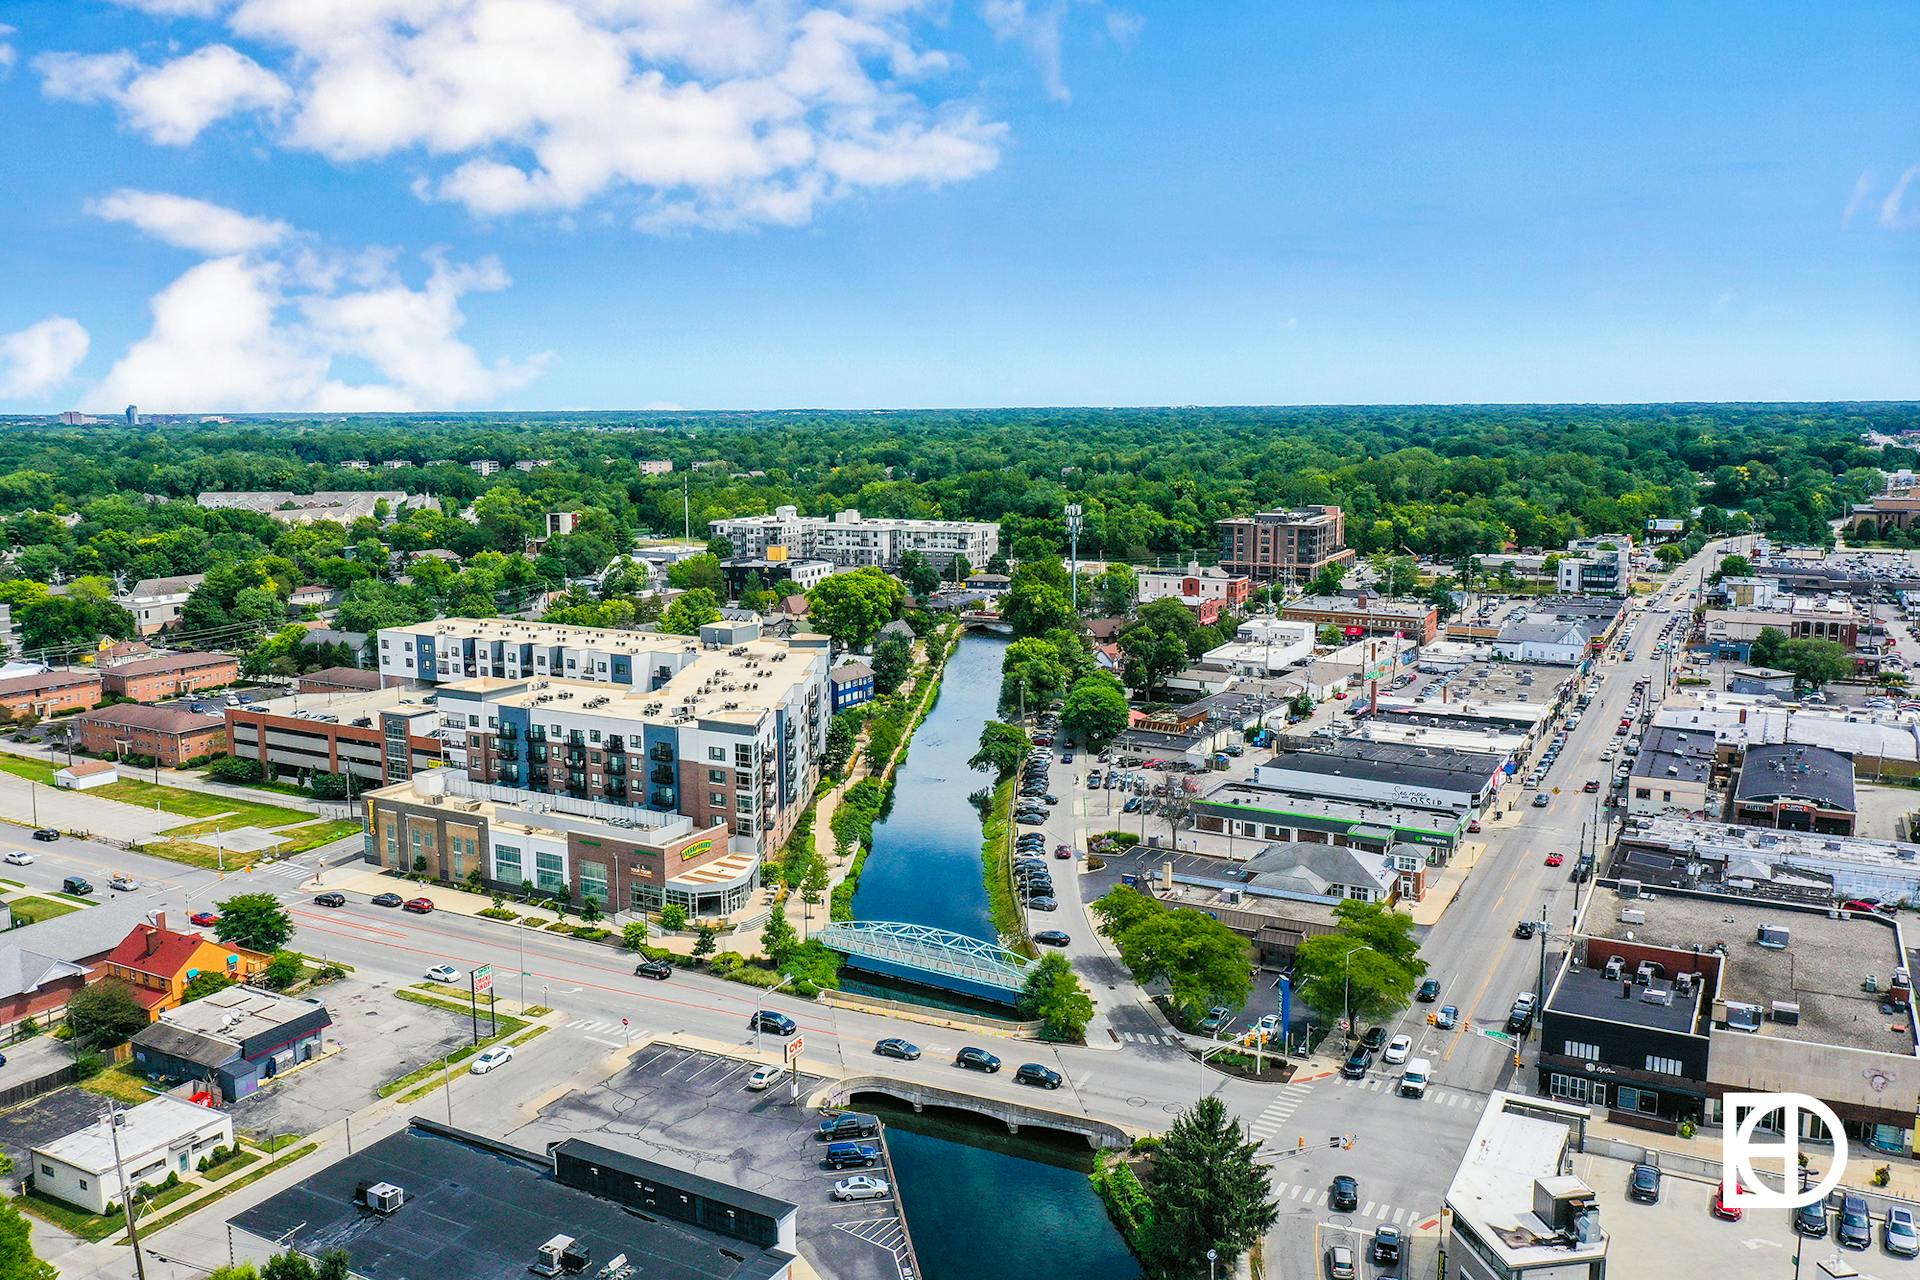 Drone photo of the Broad Ripple canal